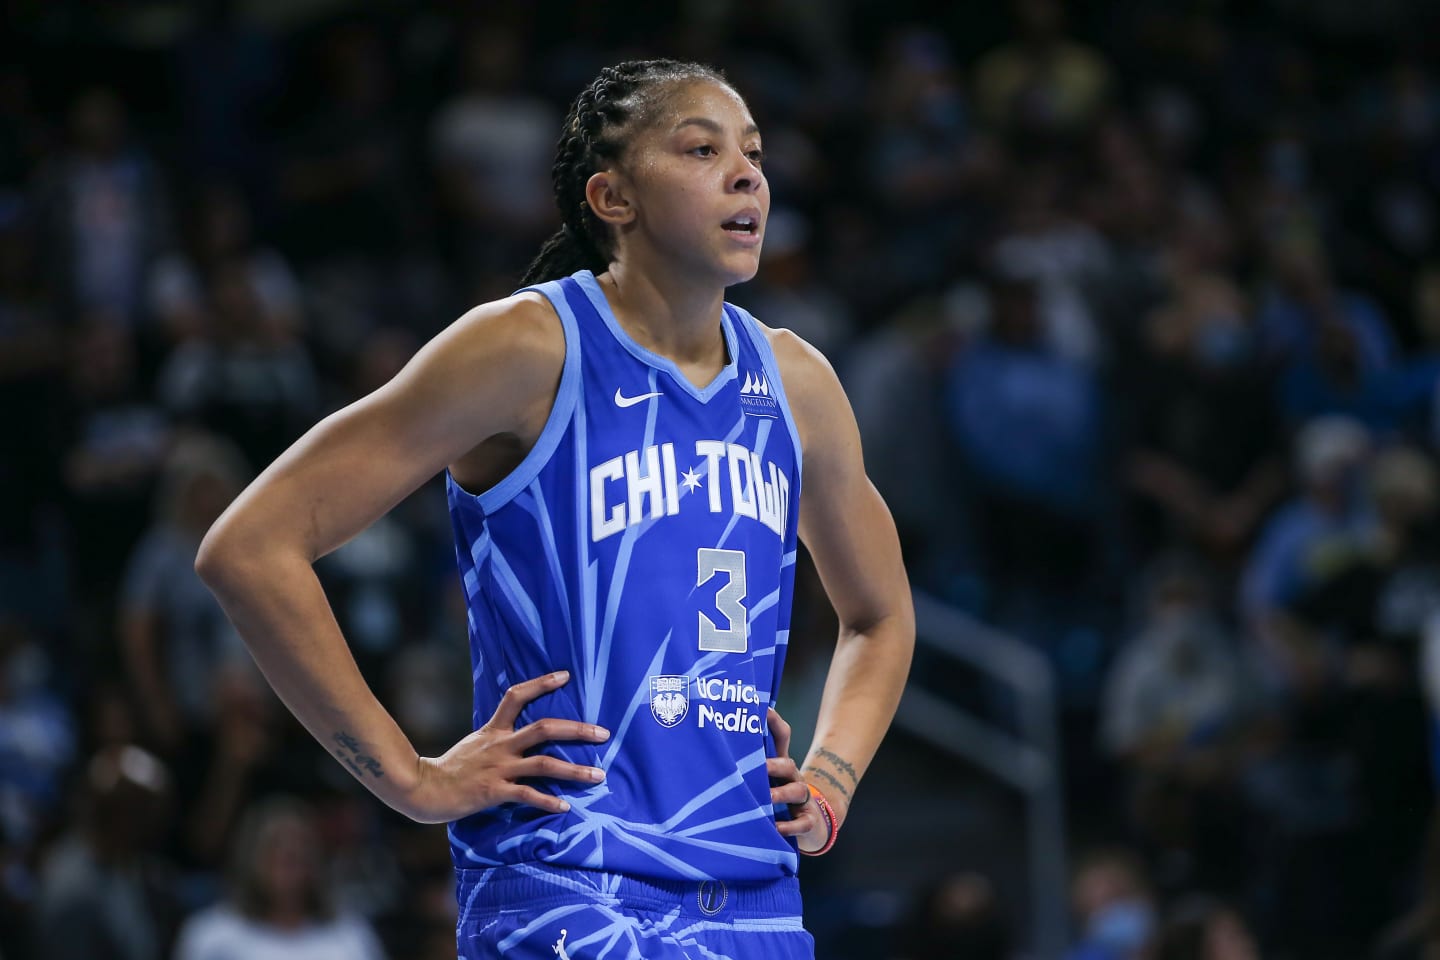 Candace Parker: I Wouldn't Be In WNBA, On TV Today Without Title IX –